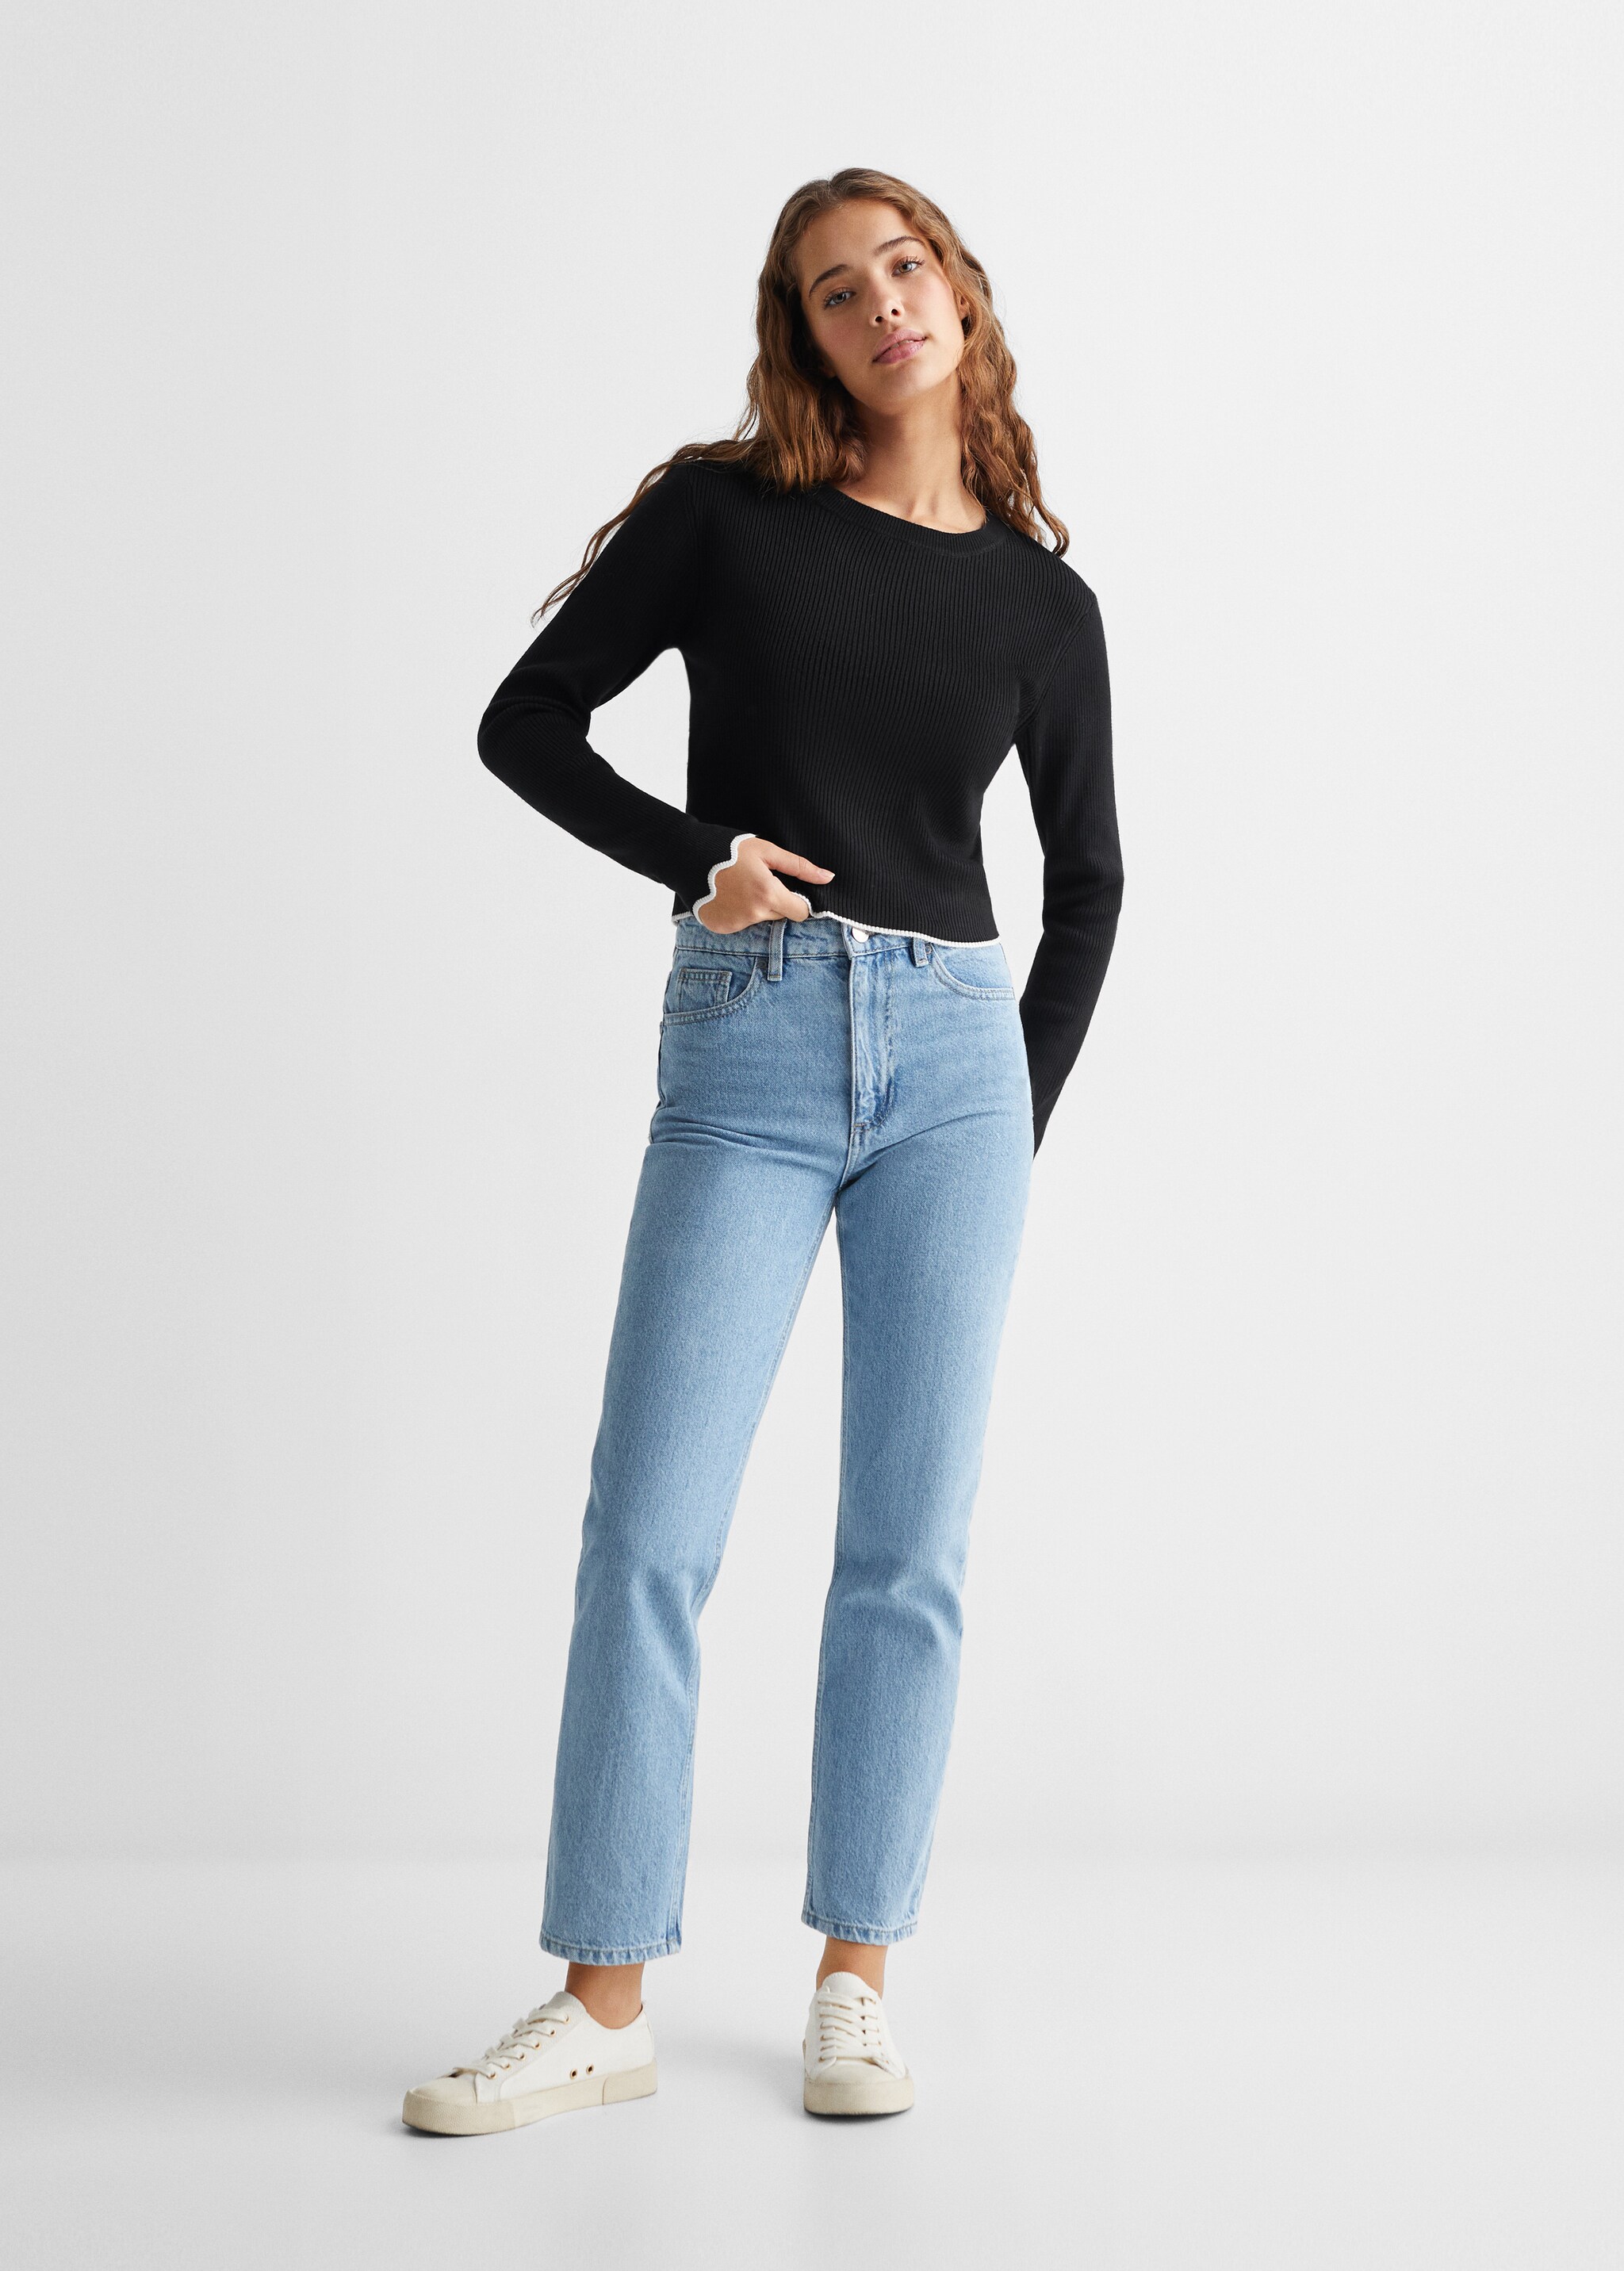 Contrast ribbed sweater - General plane